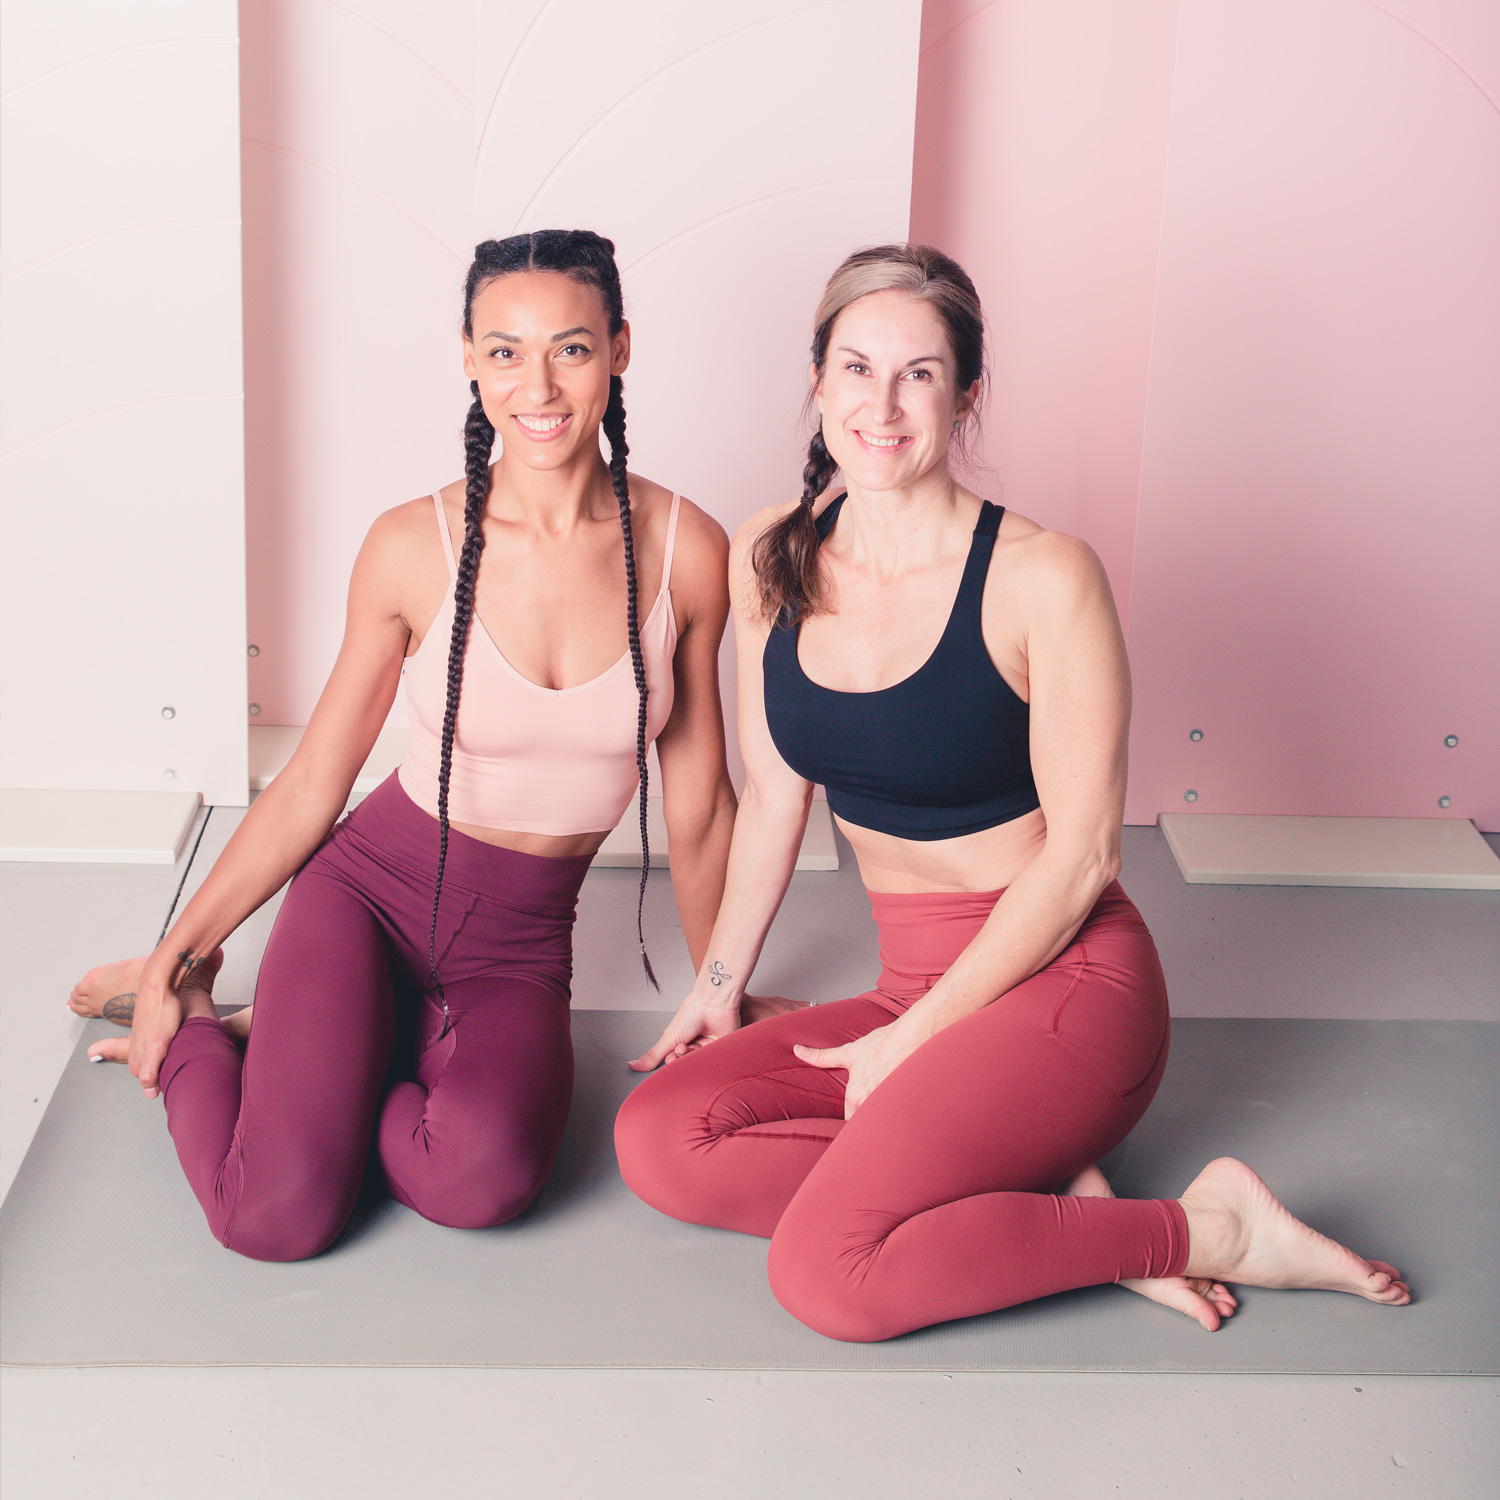 Barre Instructor Certification Courses